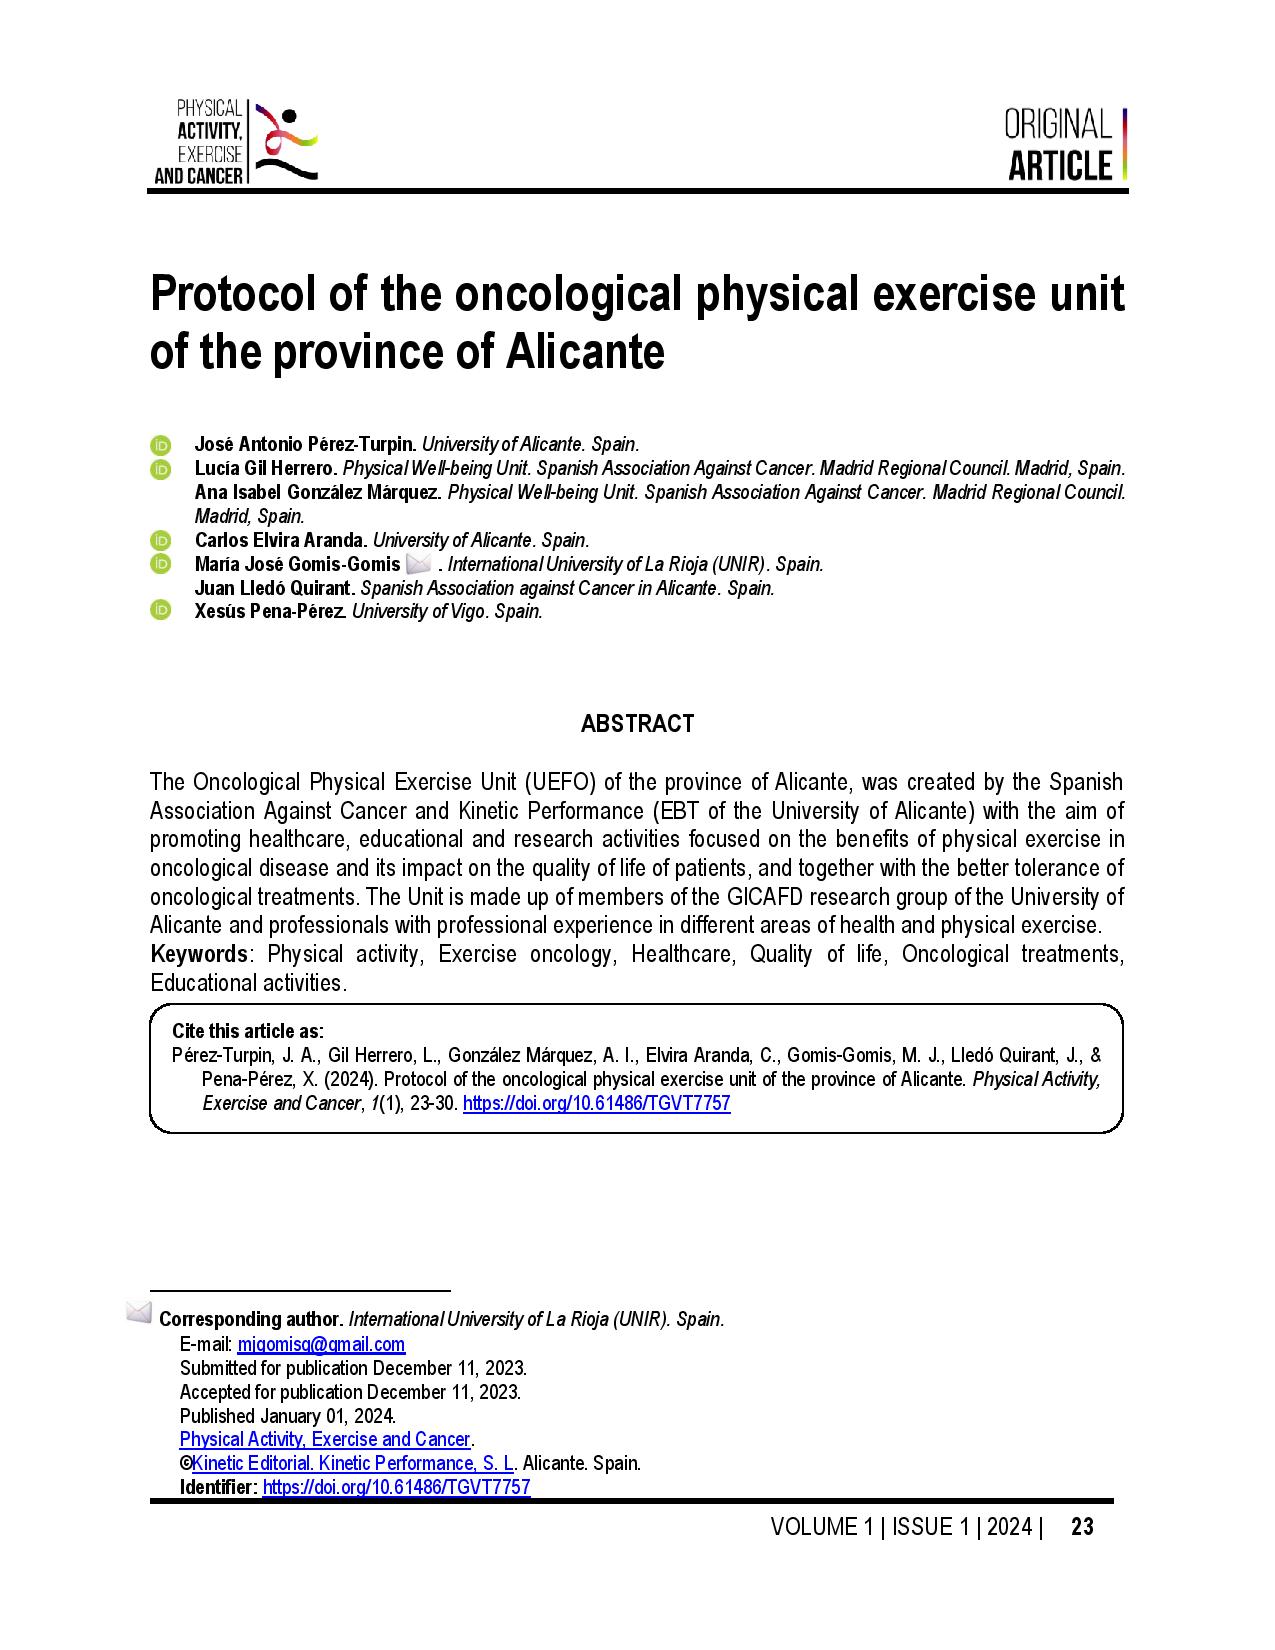 Protocol of the oncological physical exercise unit of the province of Alicante